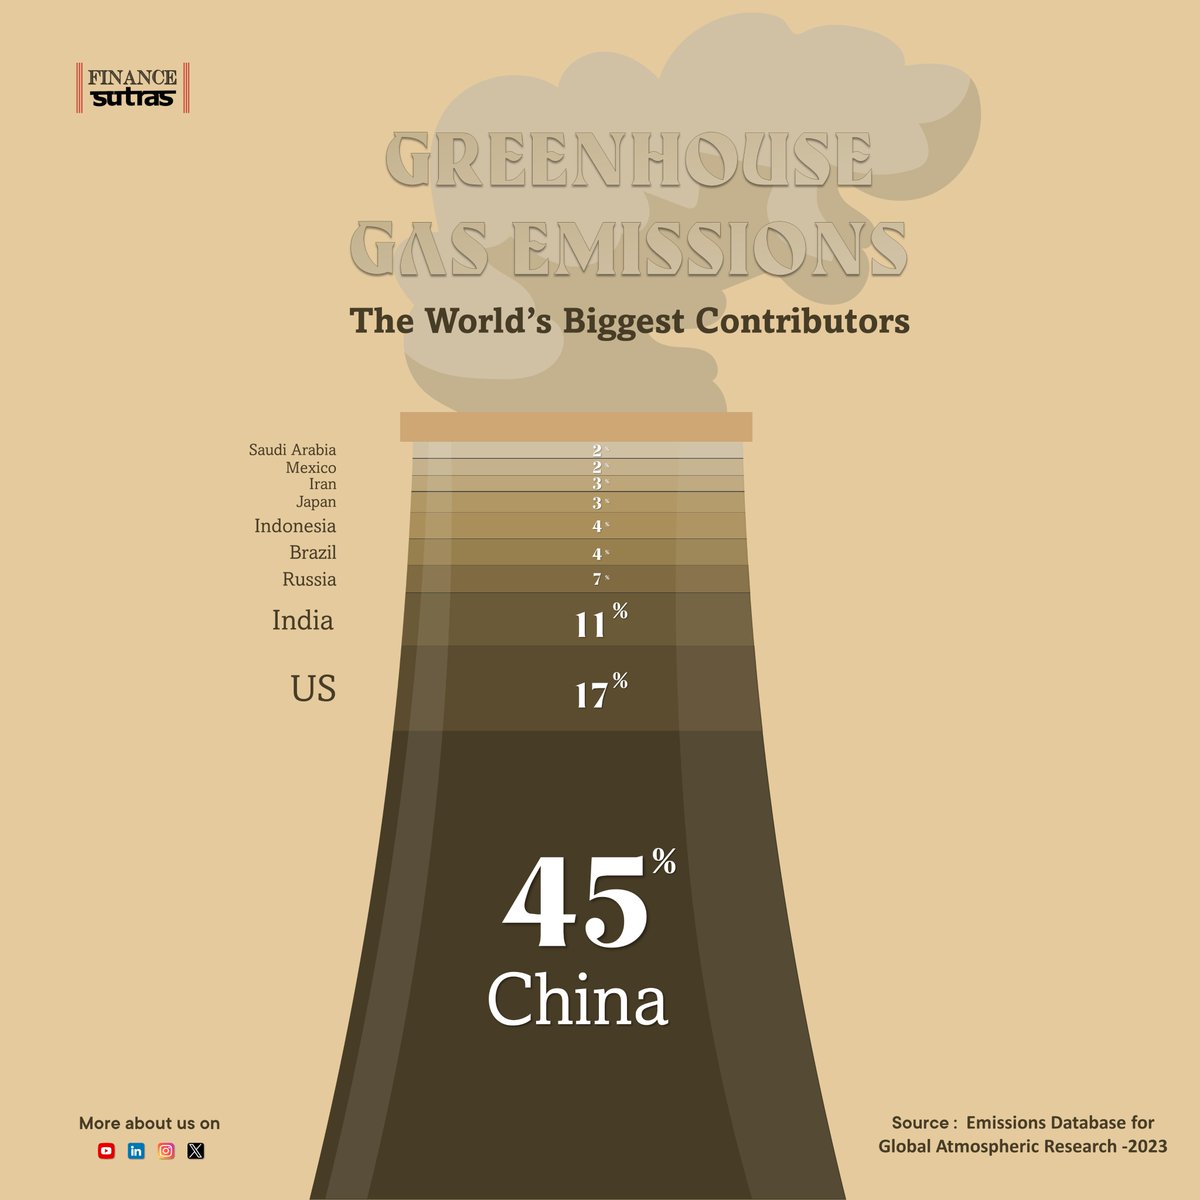 The worlds biggest contributors to greenhouse gas emissions.

The top 10 Countries by greenhouse gas emissions in 2022

#carbon #industry #India #china #carbonemission #greengas #financesutras #infographic #linkedinpost #post